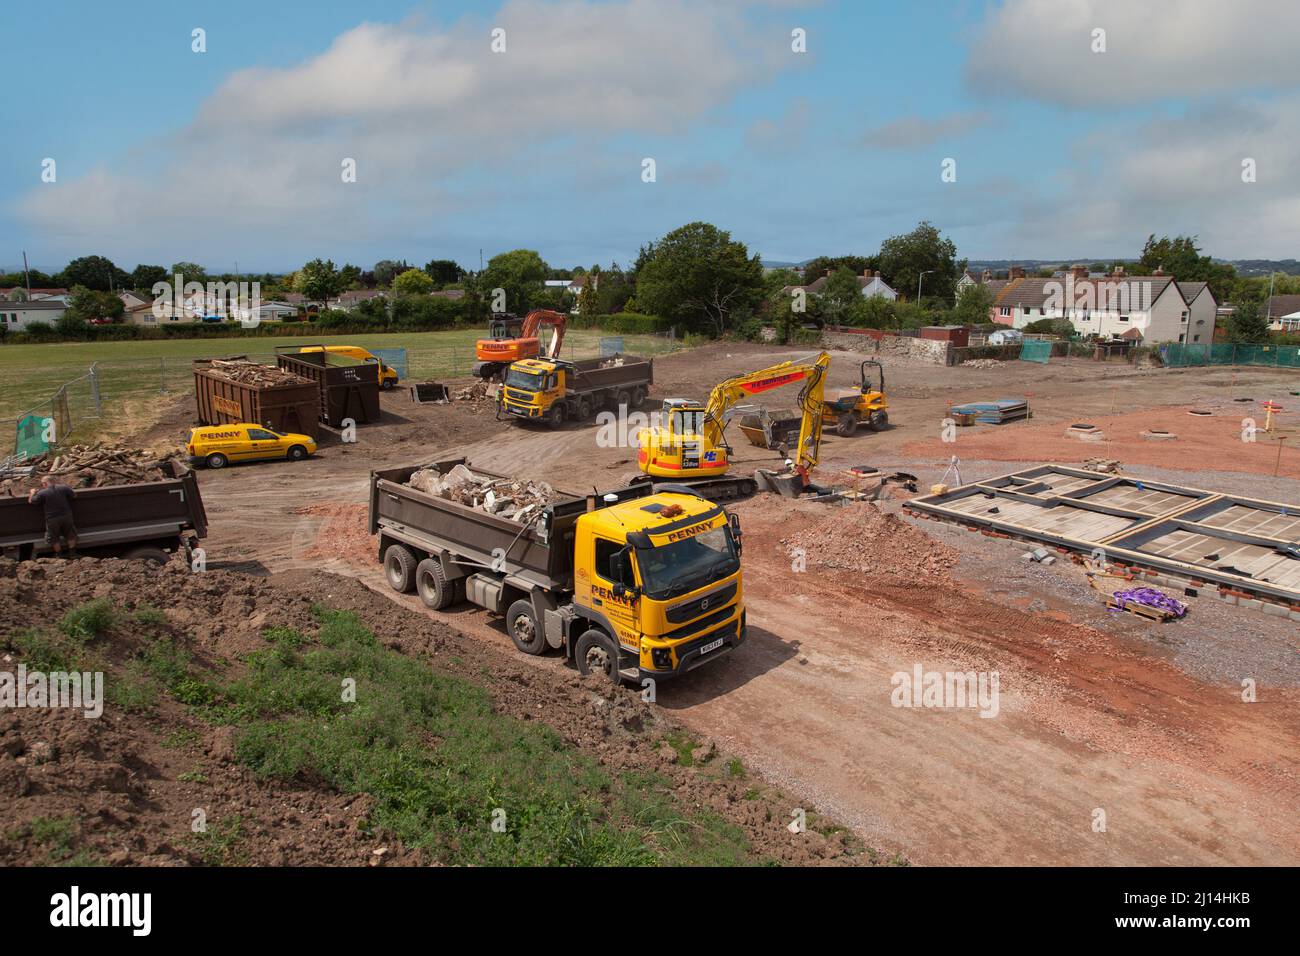 A new build building site in progress, trucks removing rubble from the site, diggers at work. Stock Photo